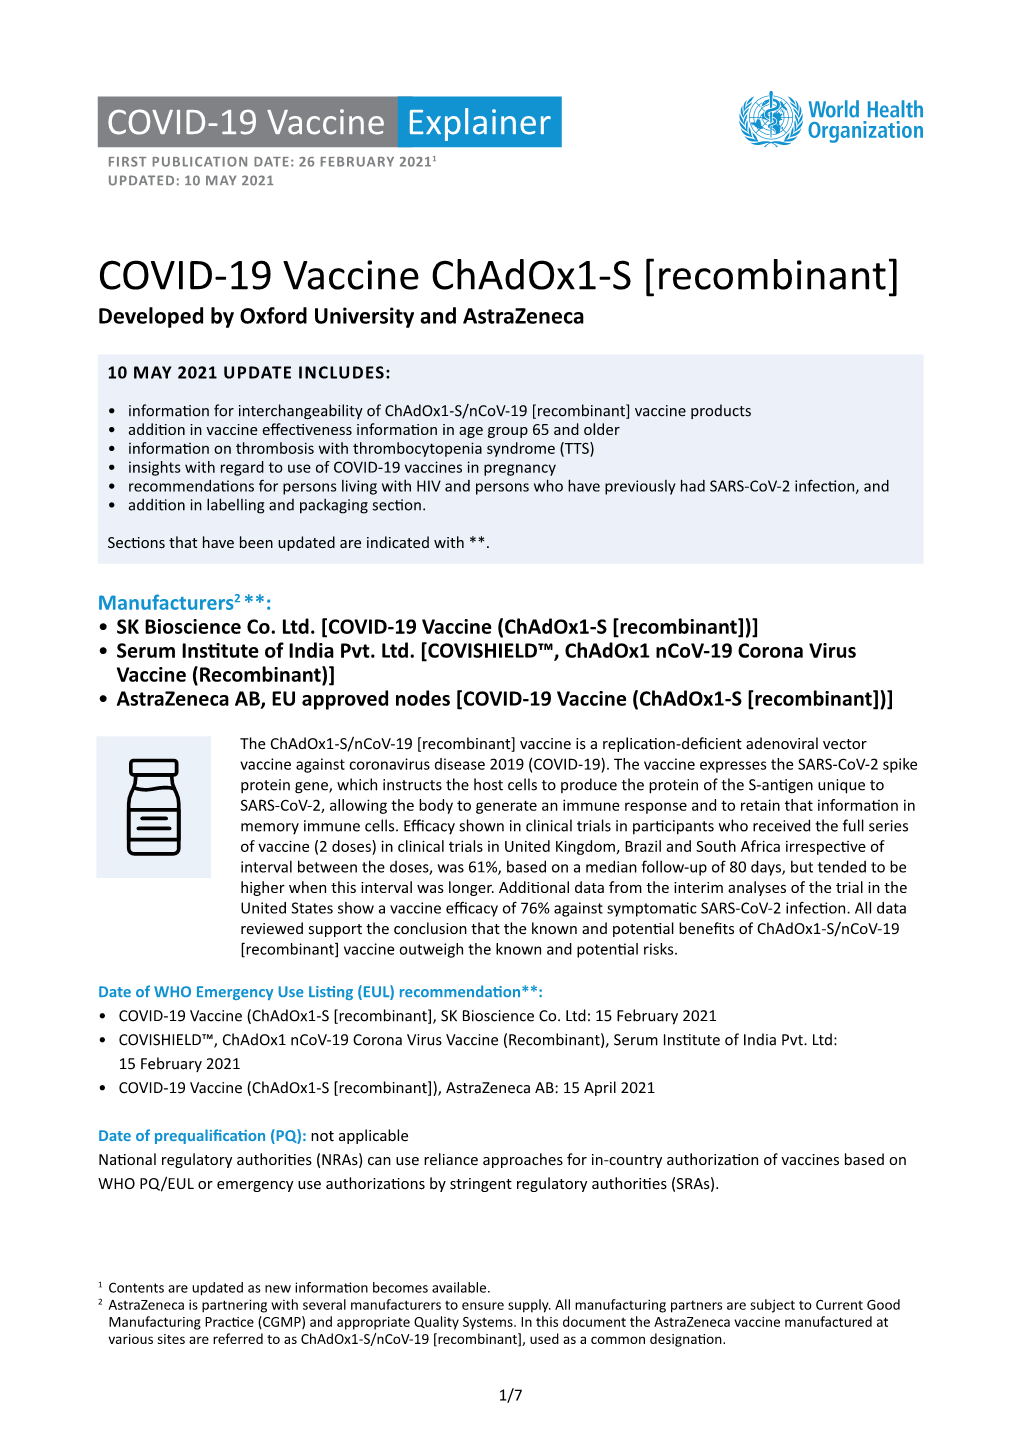 COVID-19 Vaccine Chadox1-S [Recombinant] Developed by Oxford University and Astrazeneca